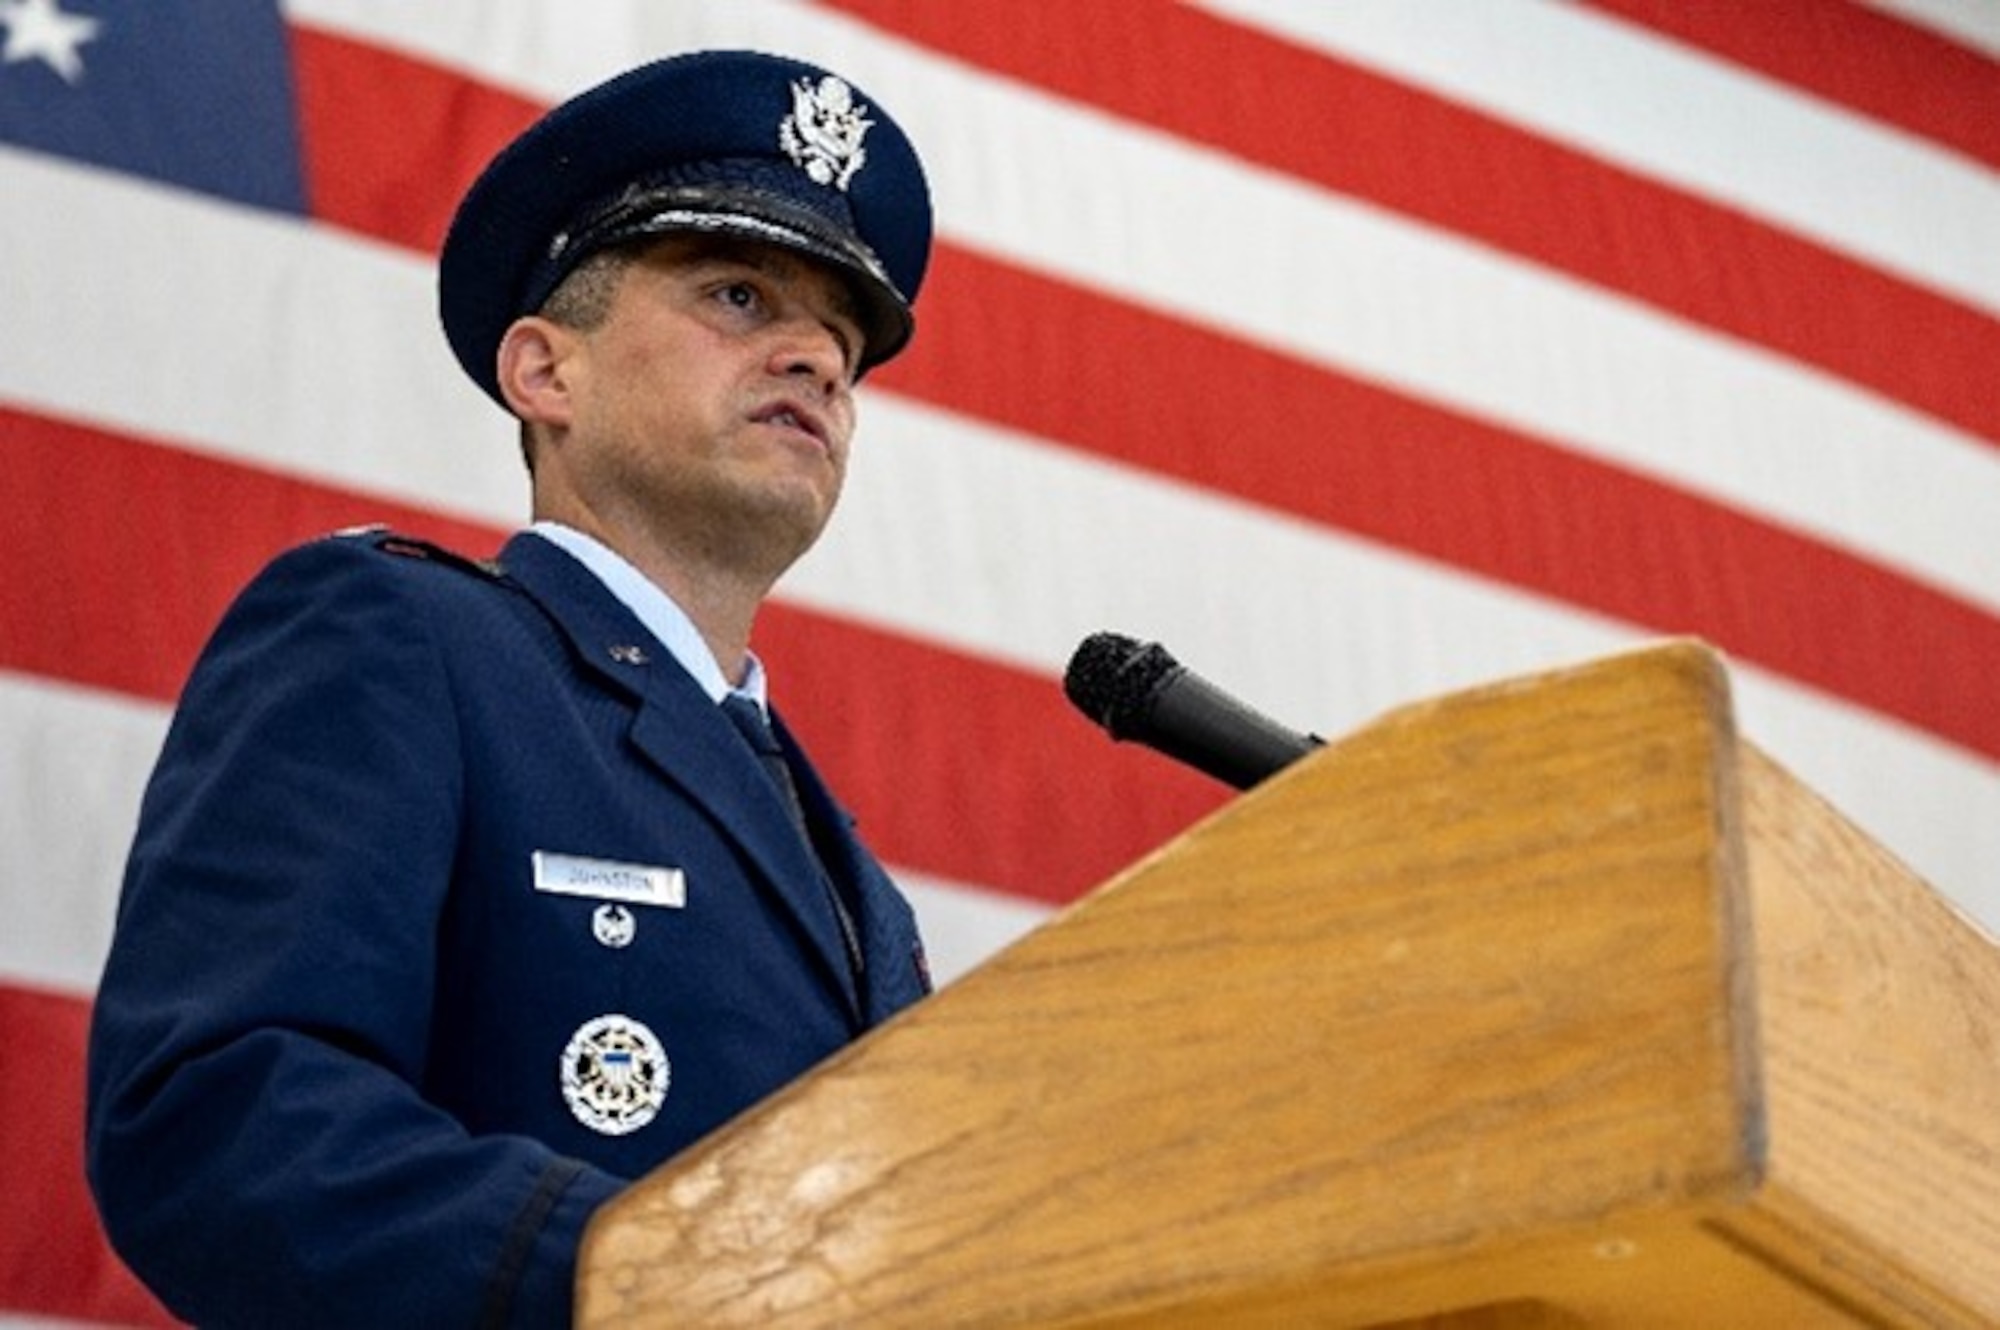 Colonel Robert Johnston, incoming 492d Special Operations Training Group commander, shares remarks during a change of command ceremony as he accepts command of the 492d SOTRG and the Air Commando Development Center-Provisional, ACDC-P, July 14, 2023, at Hurlburt Field, Florida.